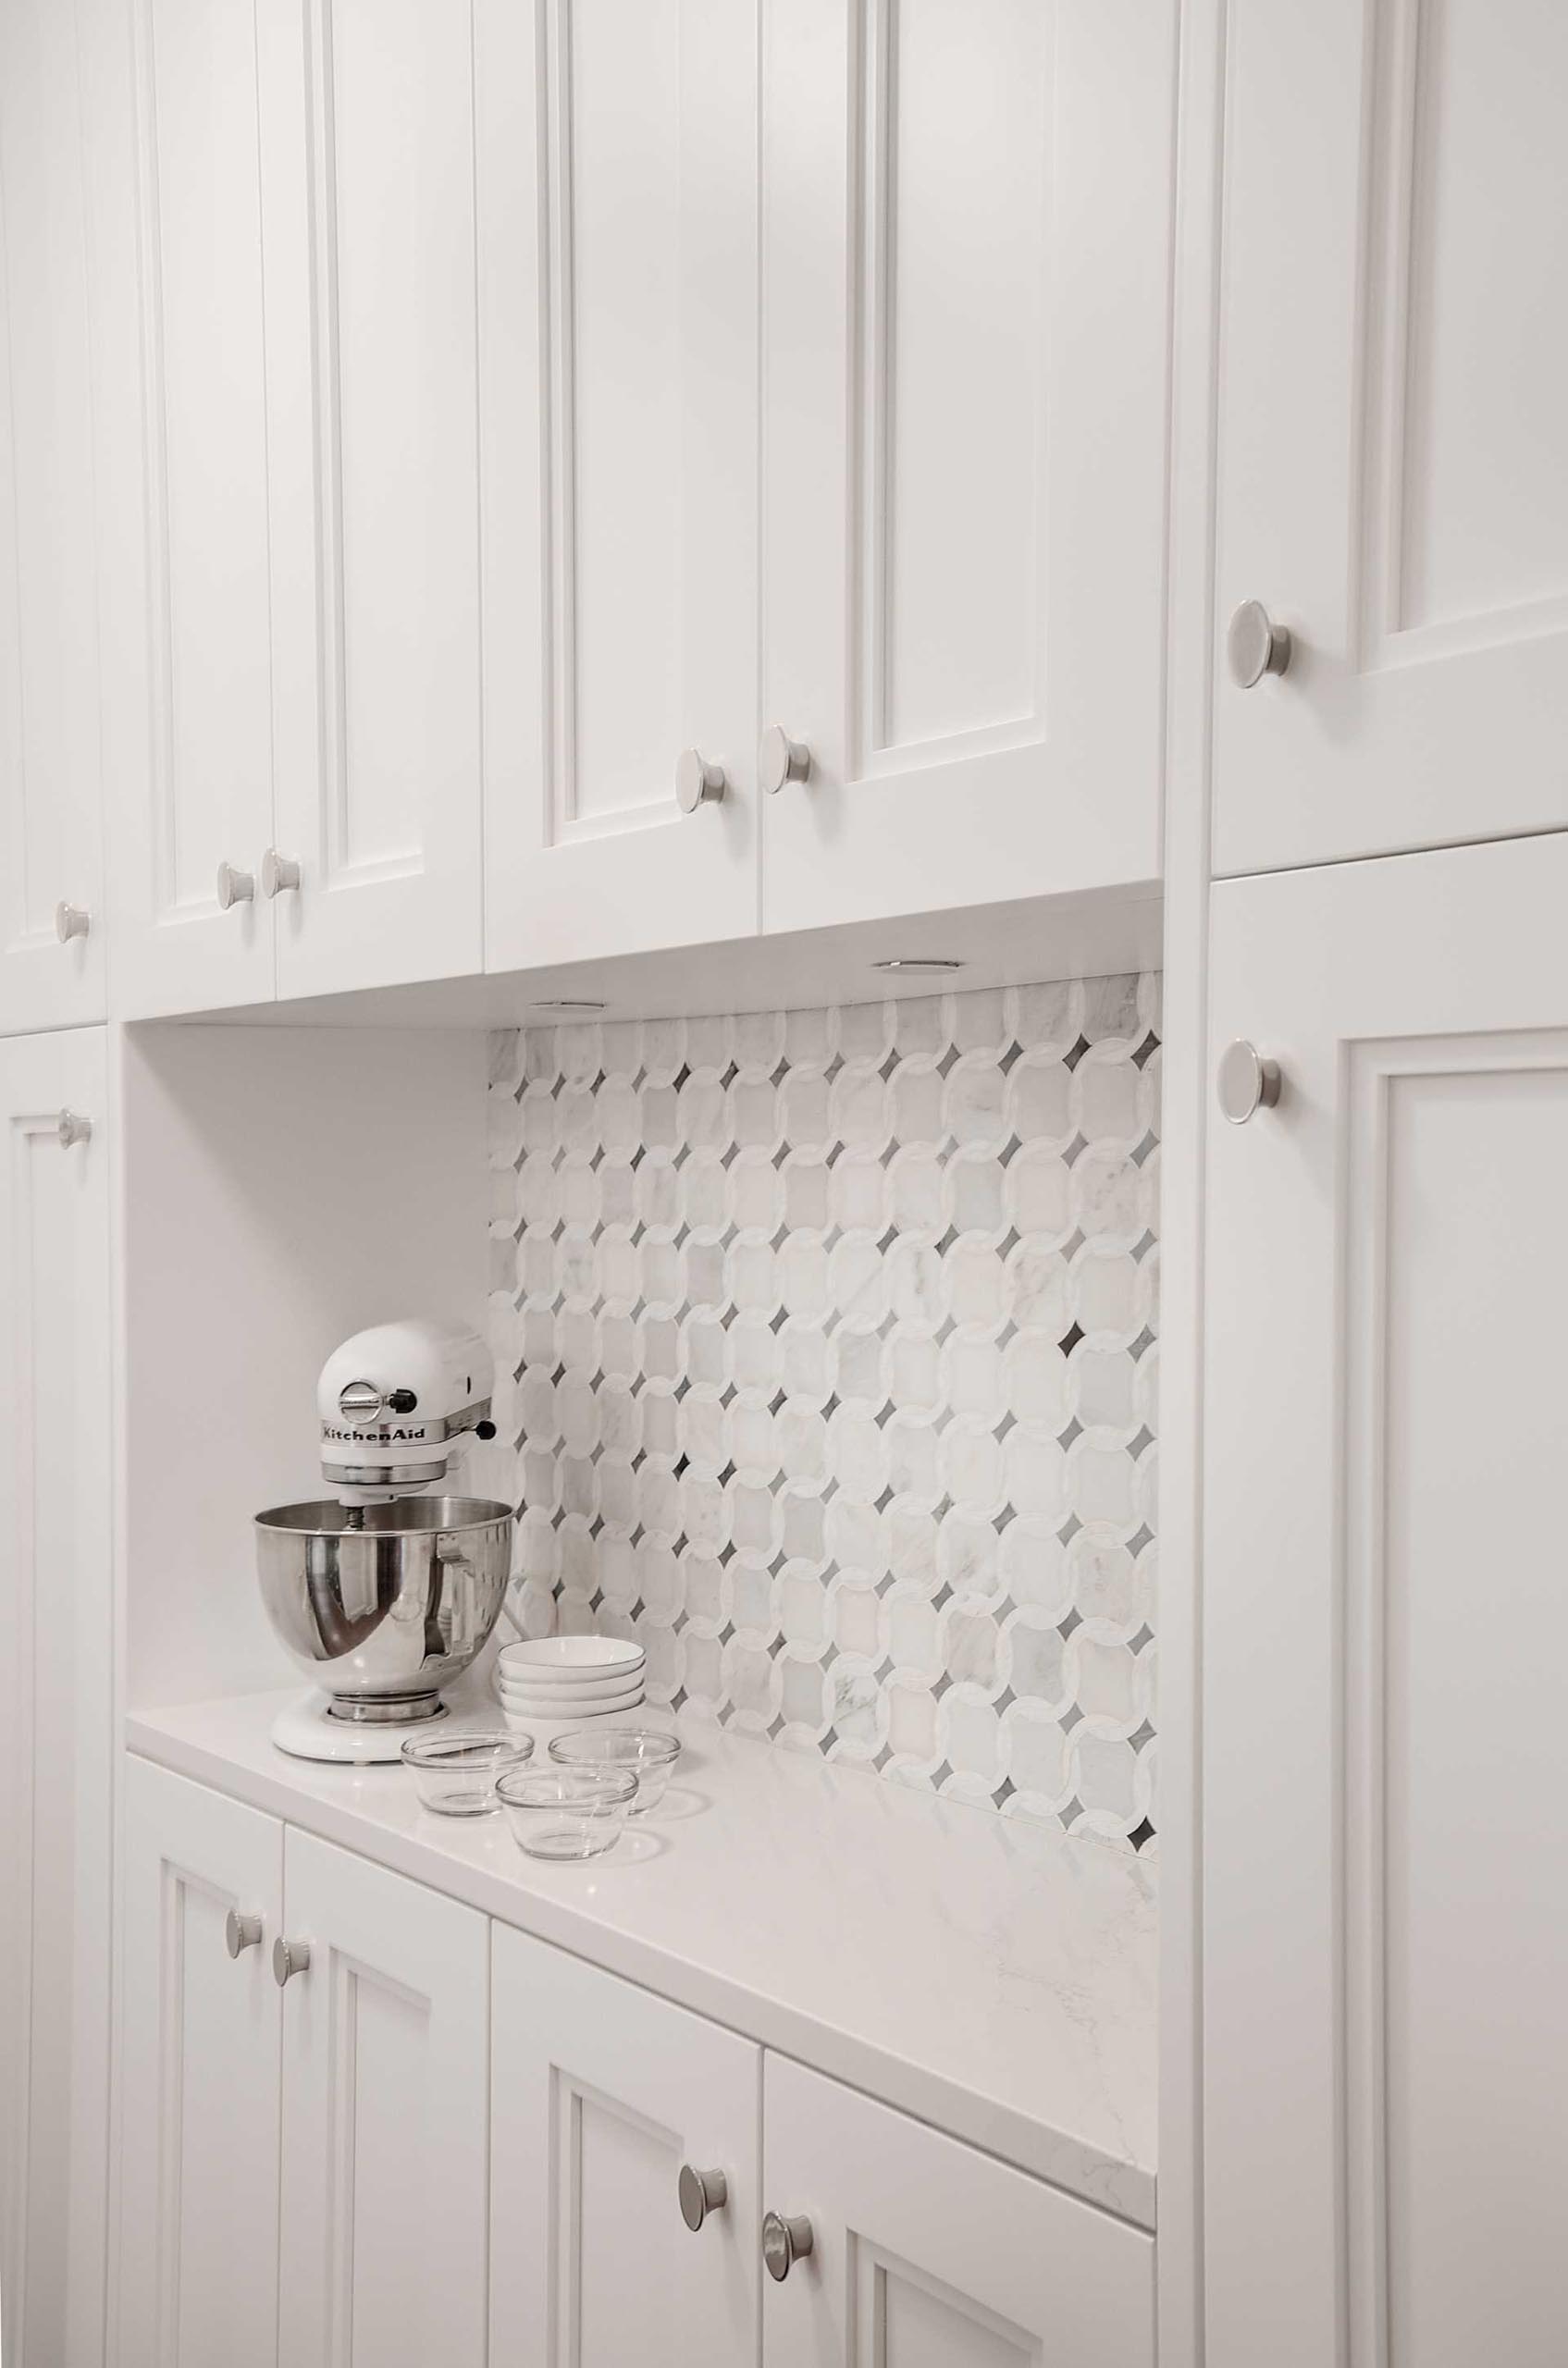 In this kitchen, a tile backsplash in a decorative pattern creates a focal point.